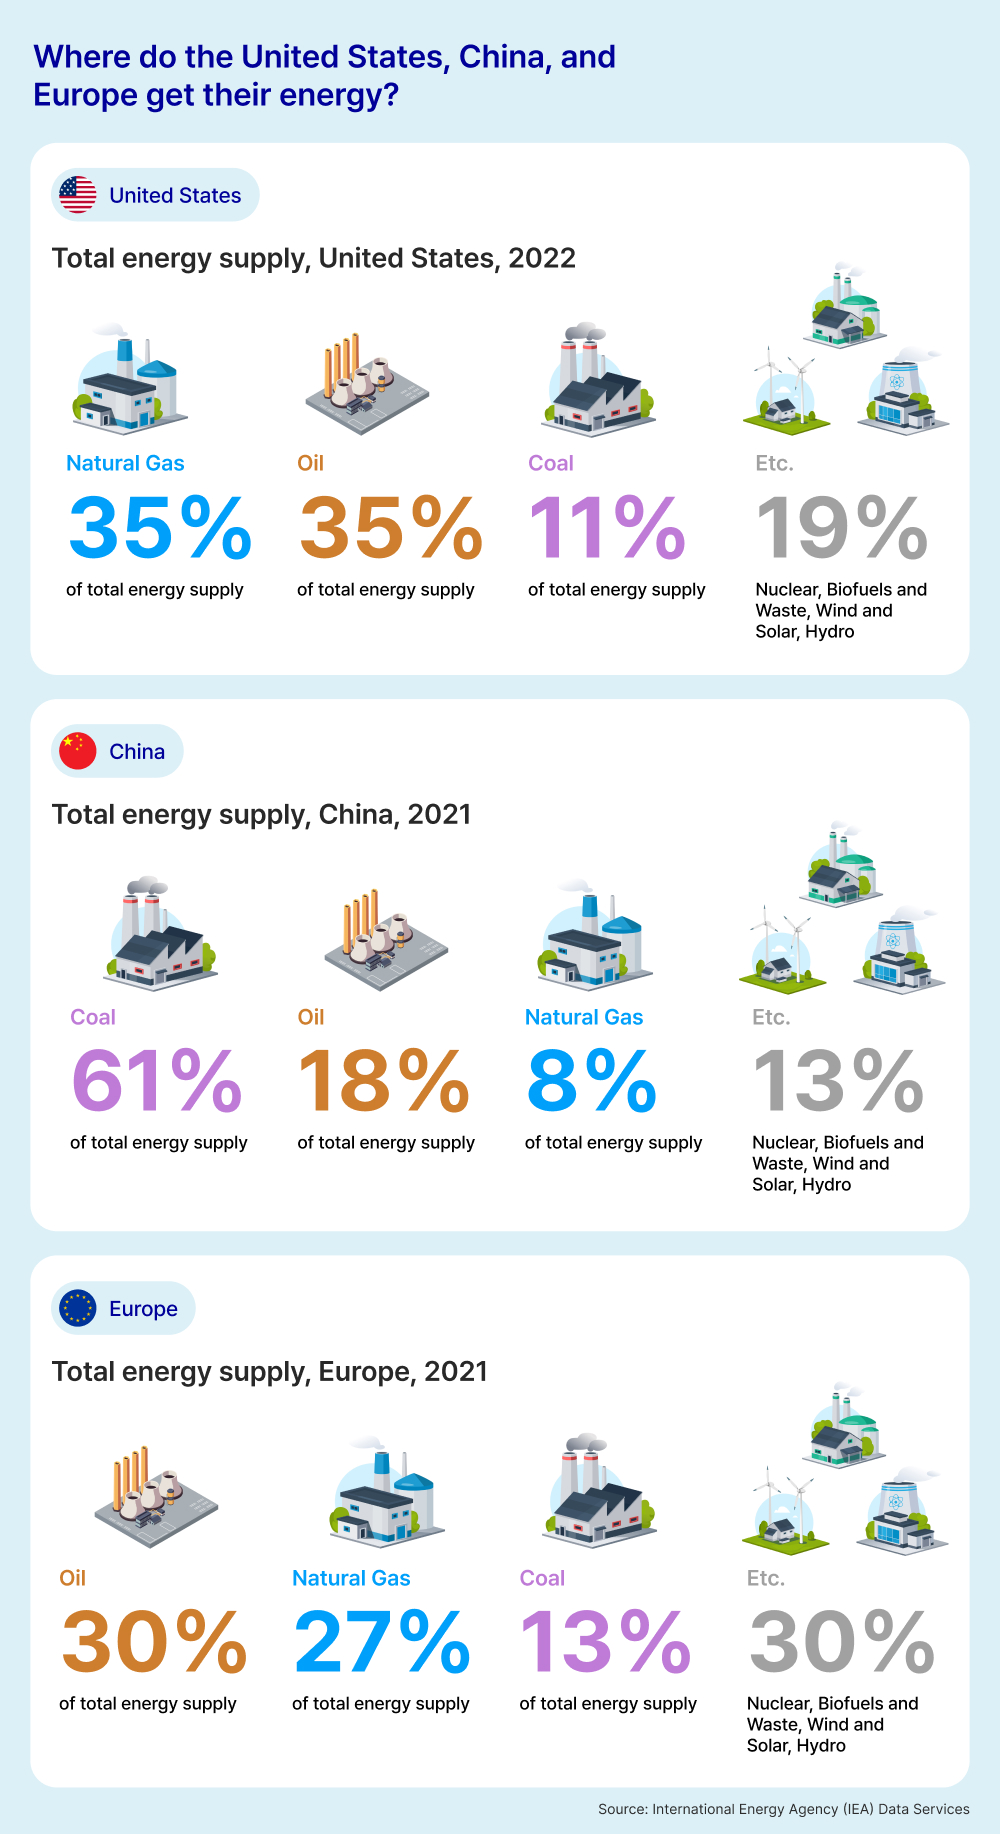 Visual comparison infographic of total energy supply in 2021 for China and Europe, and in 2022 for the US, highlighting key energy sources and their proportions in each region